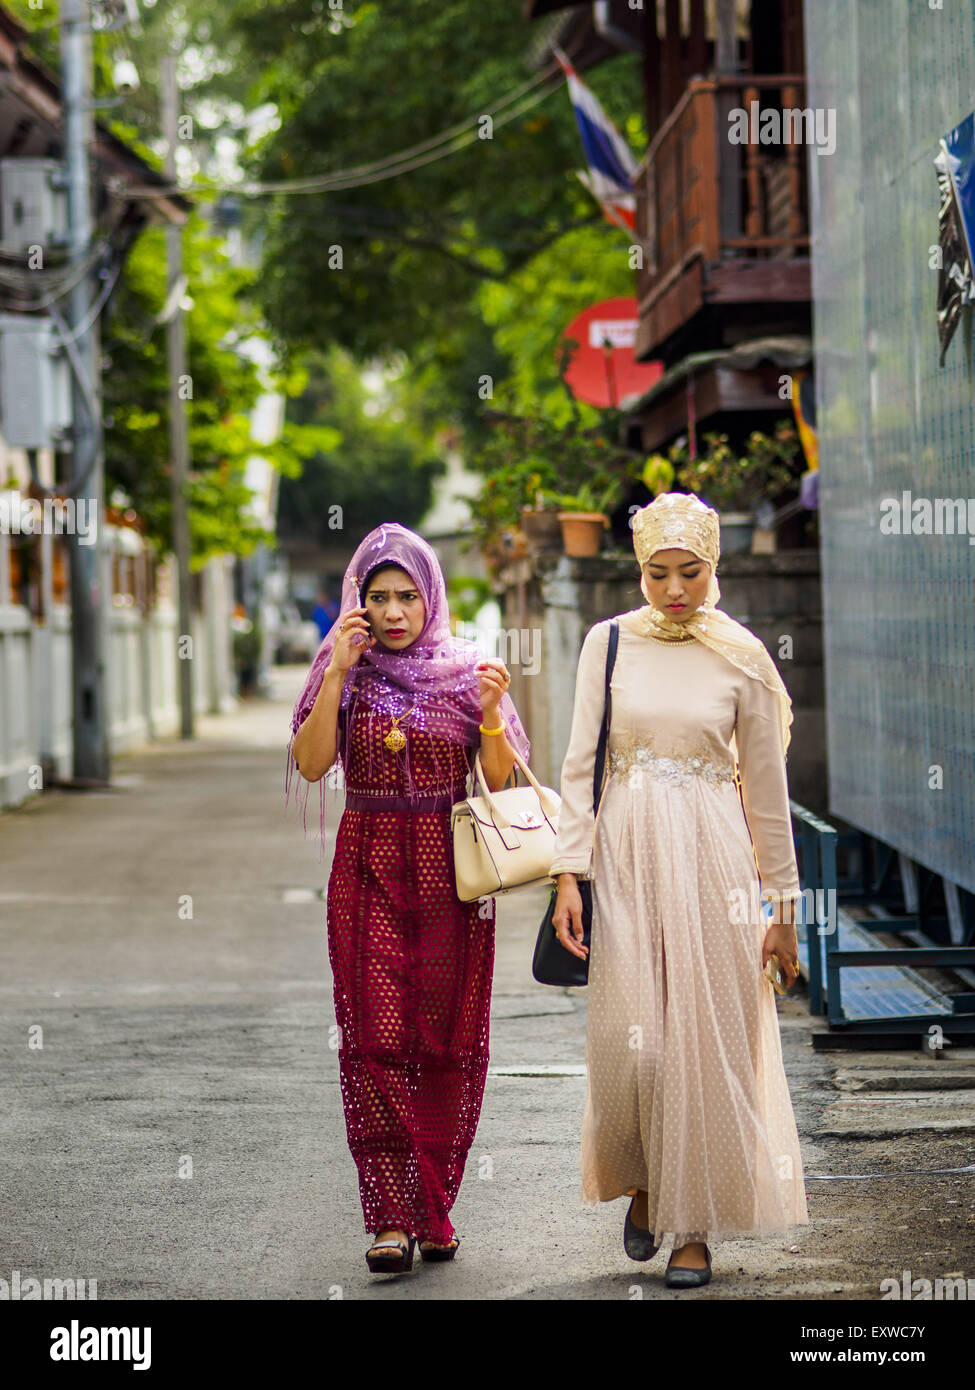 Bangkok, Thailand. 17th July, 2015. Women walk to Ton Son Mosque in Bangkok for Eid al-Fitr services. Eid al-Fitr is also called Feast of Breaking the Fast, the Sugar Feast, Bayram (Bajram), the Sweet Festival or Hari Raya Puasa and the Lesser Eid. It is an important Muslim religious holiday that marks the end of Ramadan, the Islamic holy month of fasting. Muslims are not allowed to fast on Eid. Credit:  ZUMA Press, Inc./Alamy Live News Stock Photo